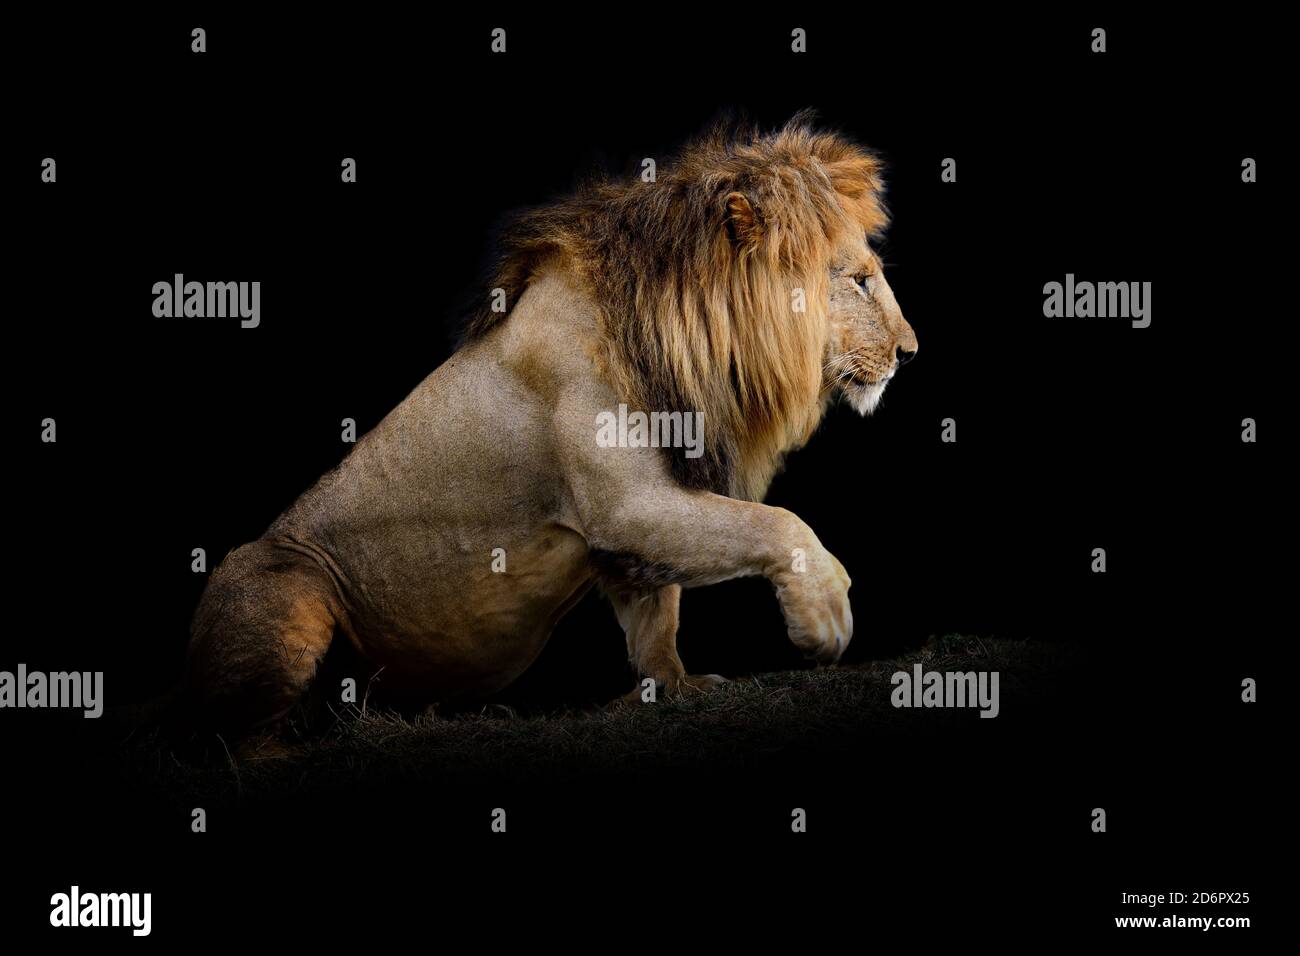 Close up view Lion. Wild animal isolated on a black background Stock Photo